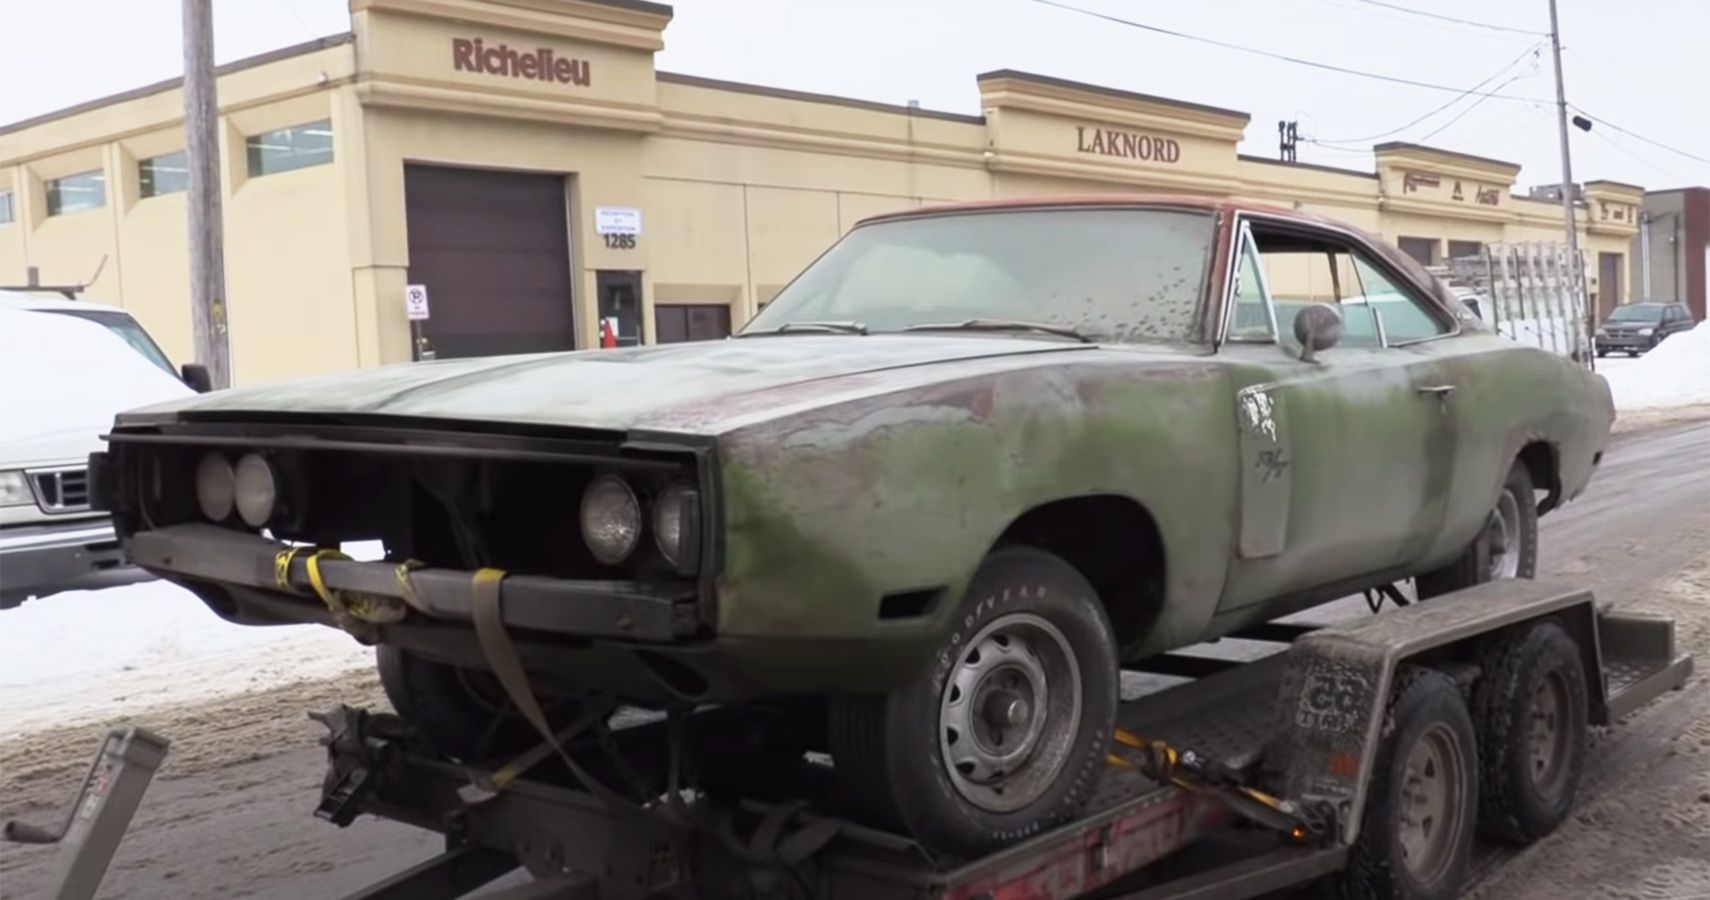 1970 Dodge Charger RT on the back of a trailer.